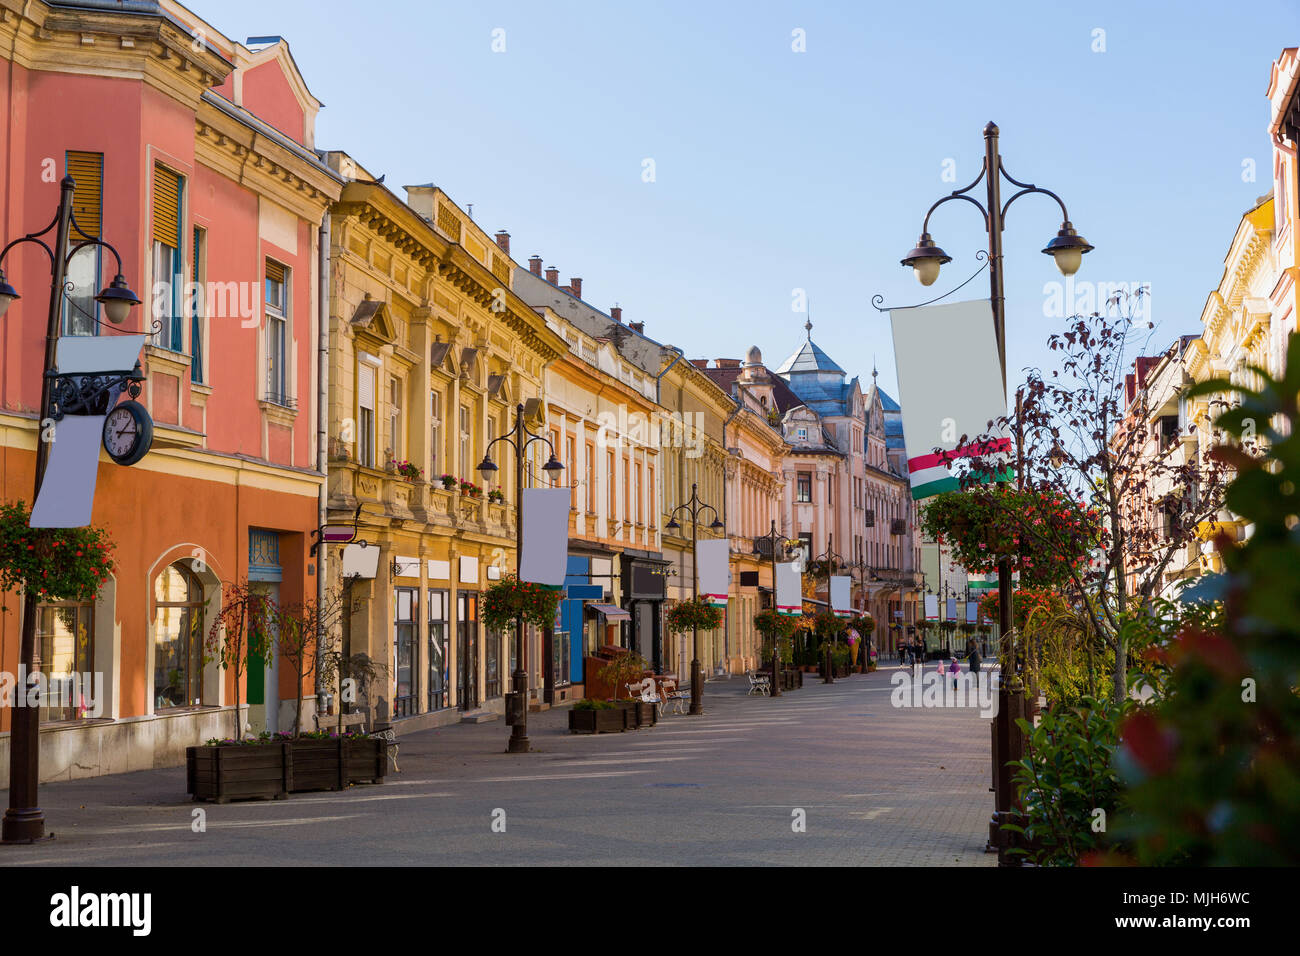 City landscape in the old town of Kaposvar, Hungary Stock Photo - Alamy